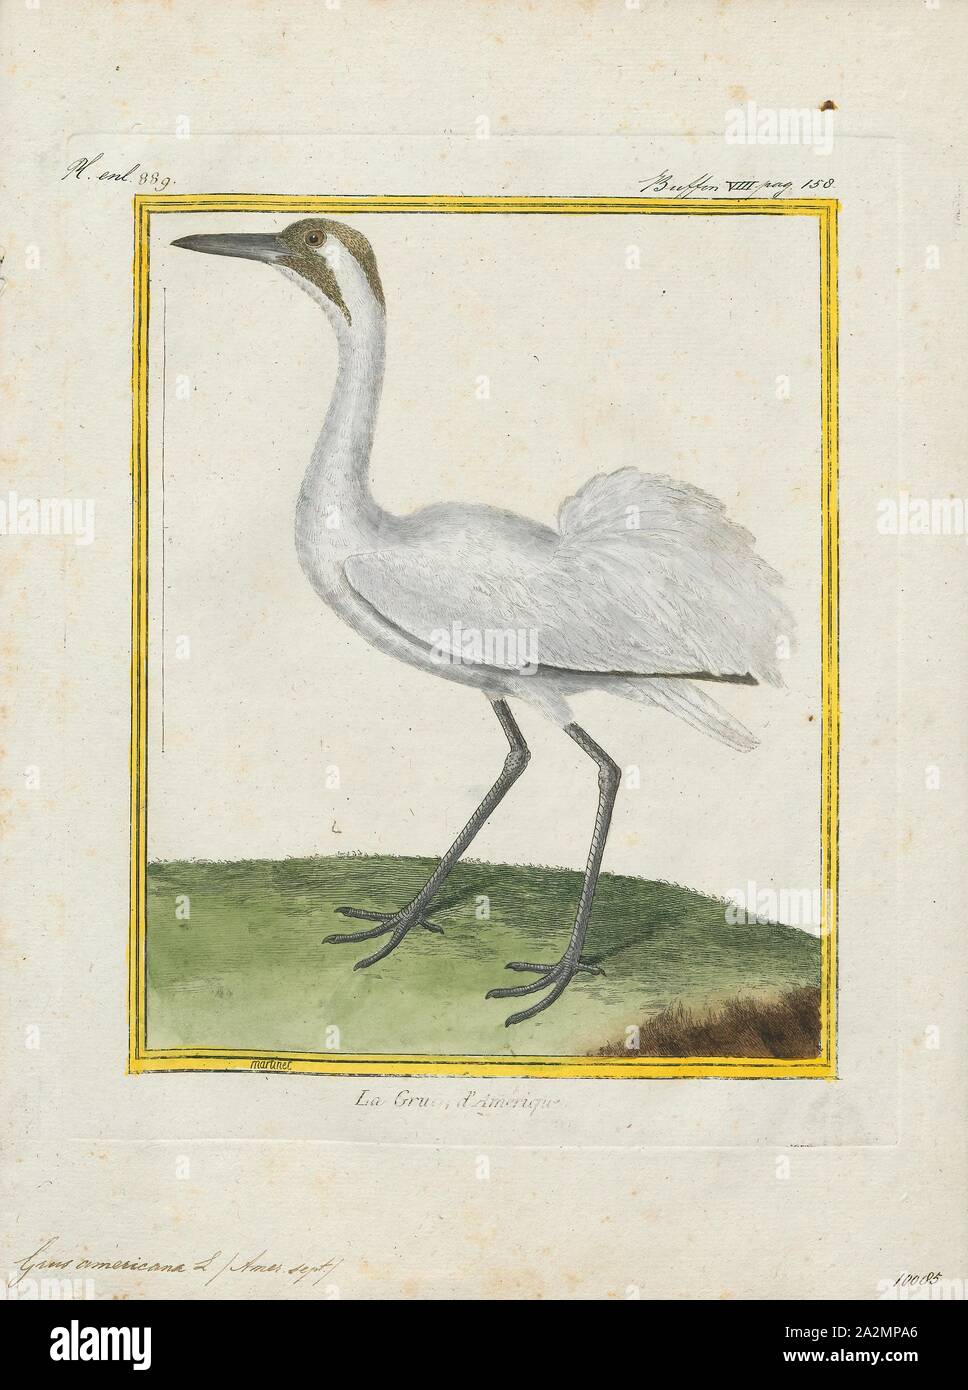 Grus americana, Print, The whooping crane (Grus americana), the tallest North American bird, is an endangered crane species named for its whooping sound. Along with the sandhill crane, it is one of only two crane species found in North America. The whooping crane's lifespan is estimated to be 22 to 24 years in the wild. After being pushed to the brink of extinction by unregulated hunting and loss of habitat to just 21 wild and two captive whooping cranes by 1941, conservation efforts have led to a limited recovery. The total number of cranes in the surviving migratory population, plus three Stock Photo